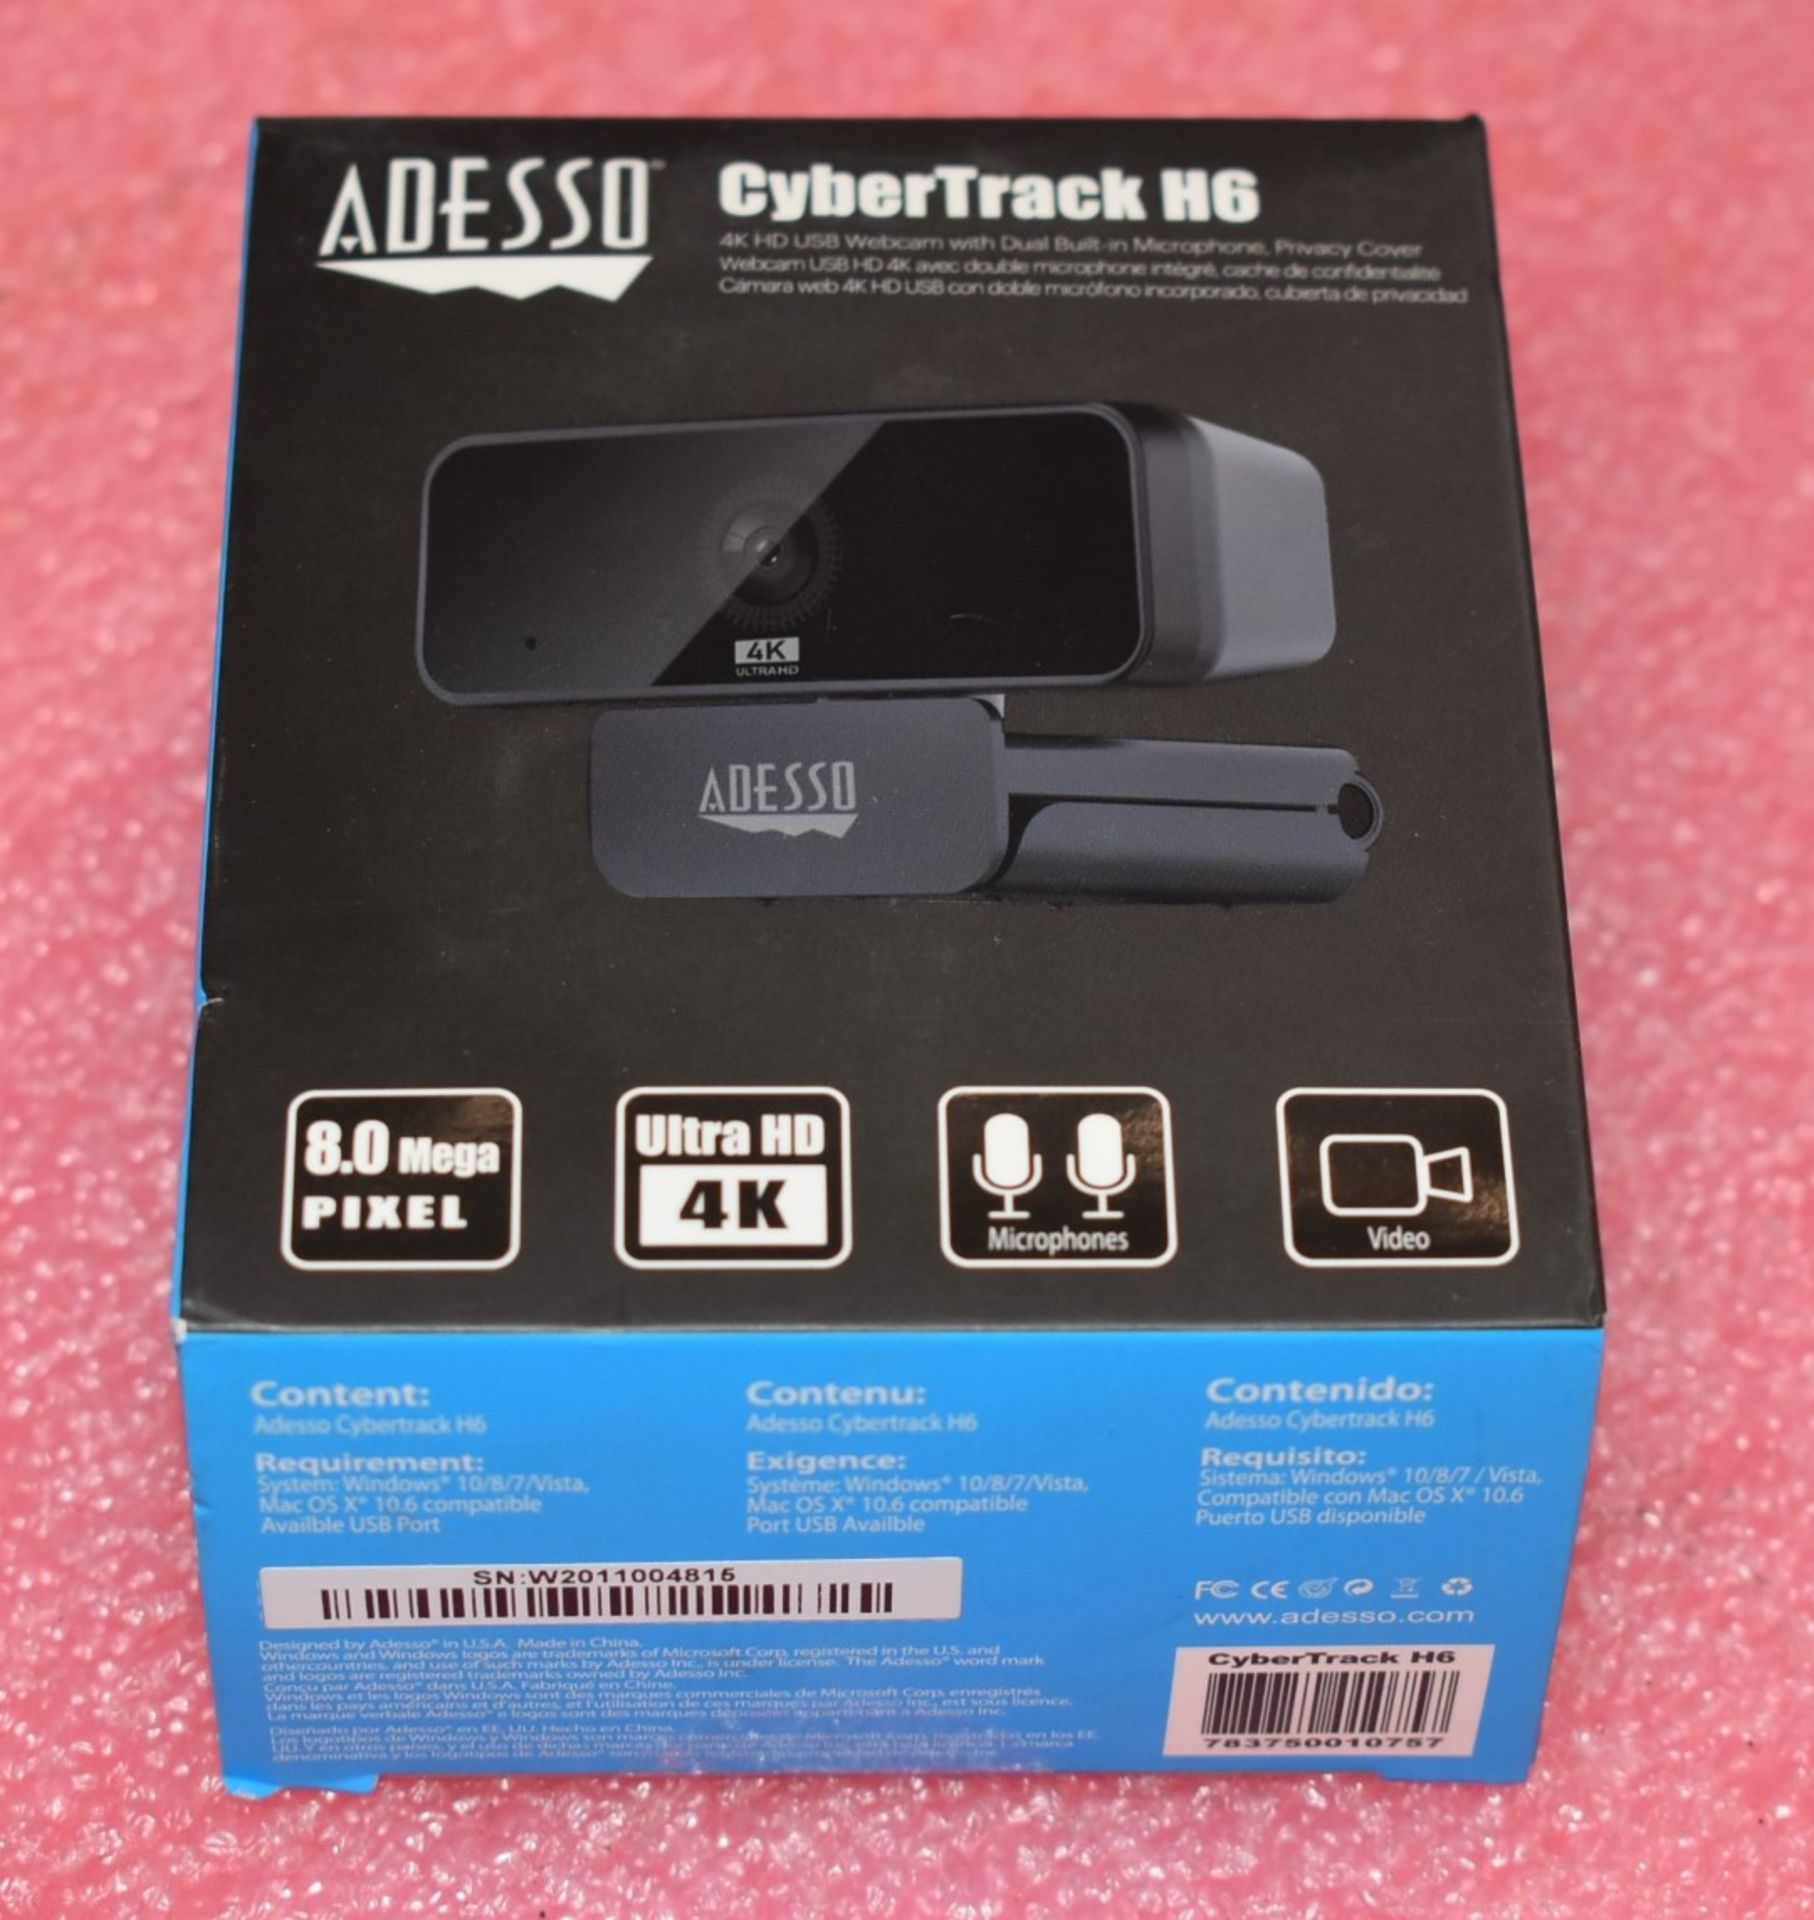 1 x Adesso CyberTrack H6 4K HD Webcam - New Boxed Stock - Image 3 of 4